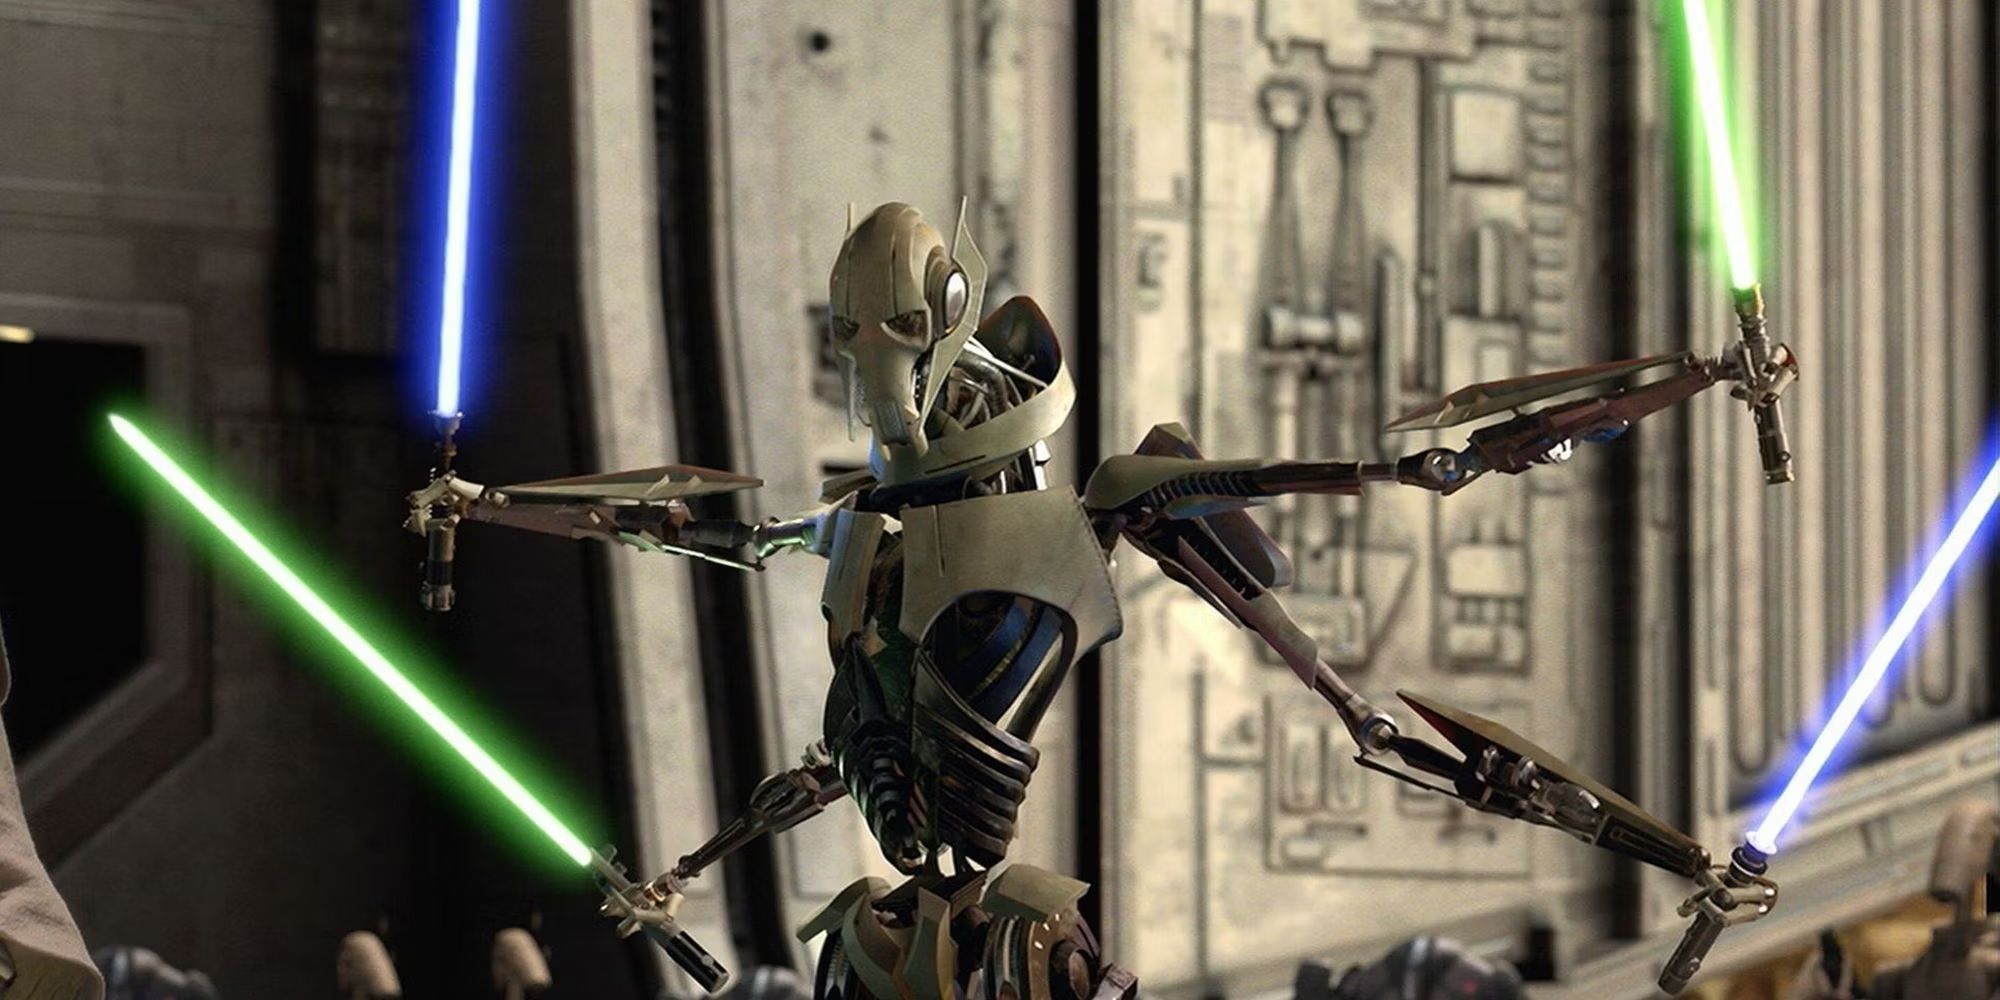 whose-lightsabers-general-grievous-uses-in-star-wars